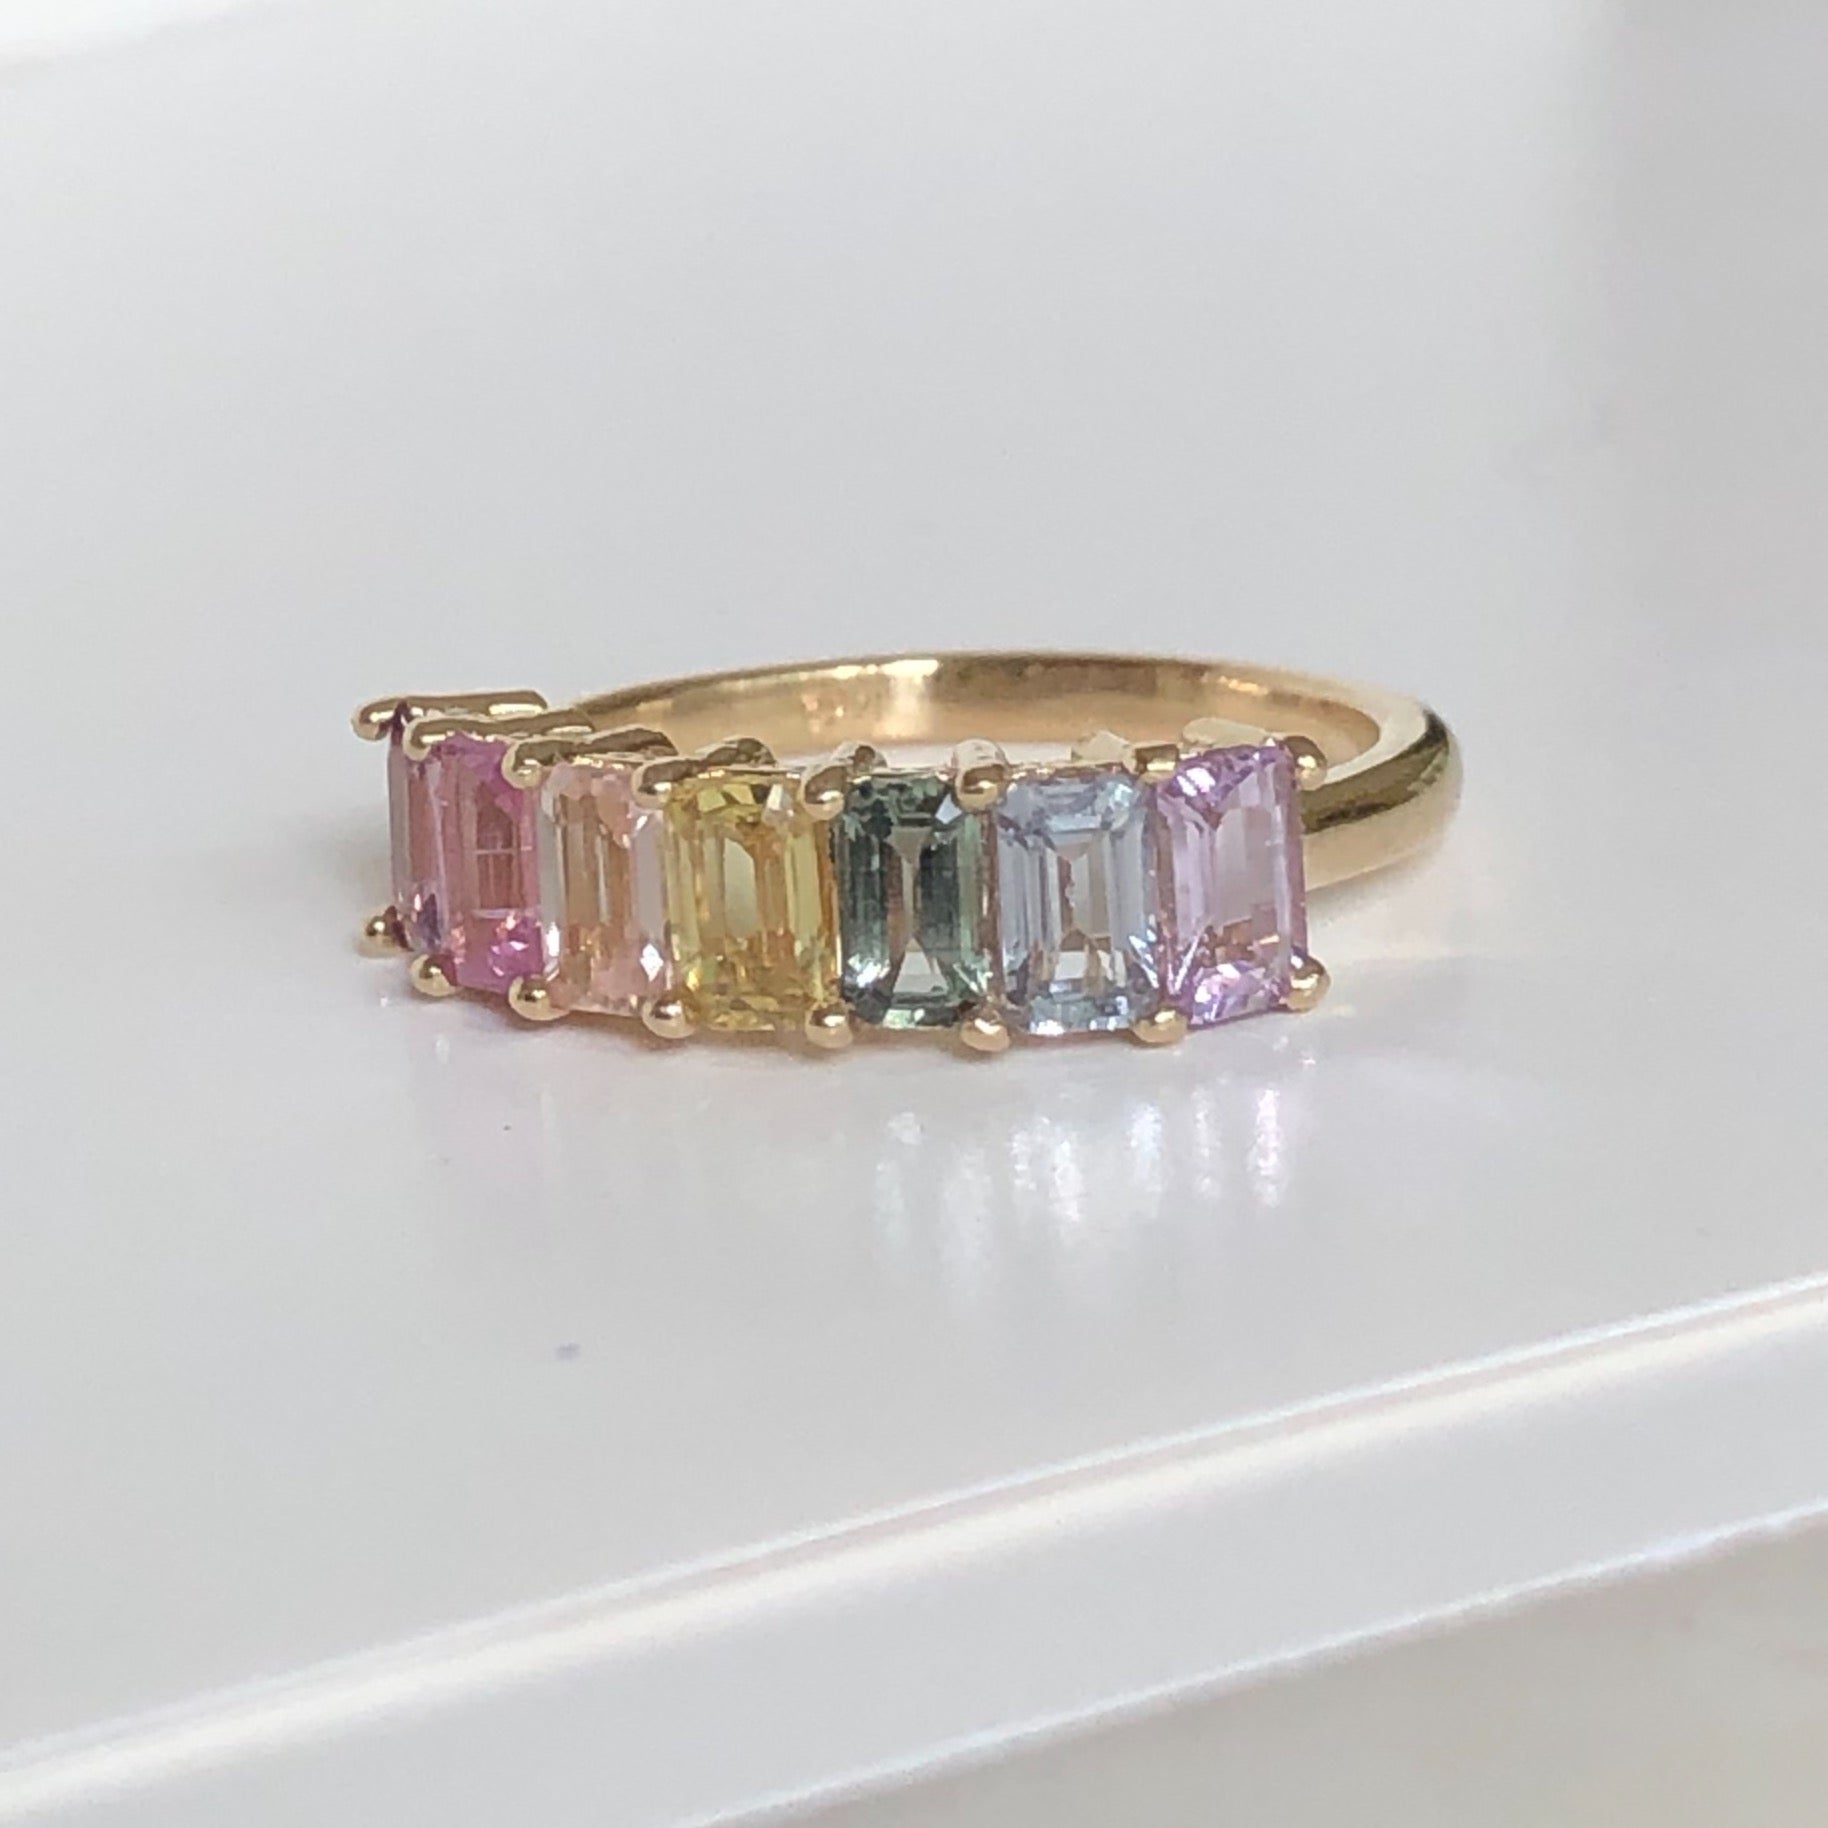 Multi-Color Natural Sapphire Half Eternity Engagement Band Ring Gold